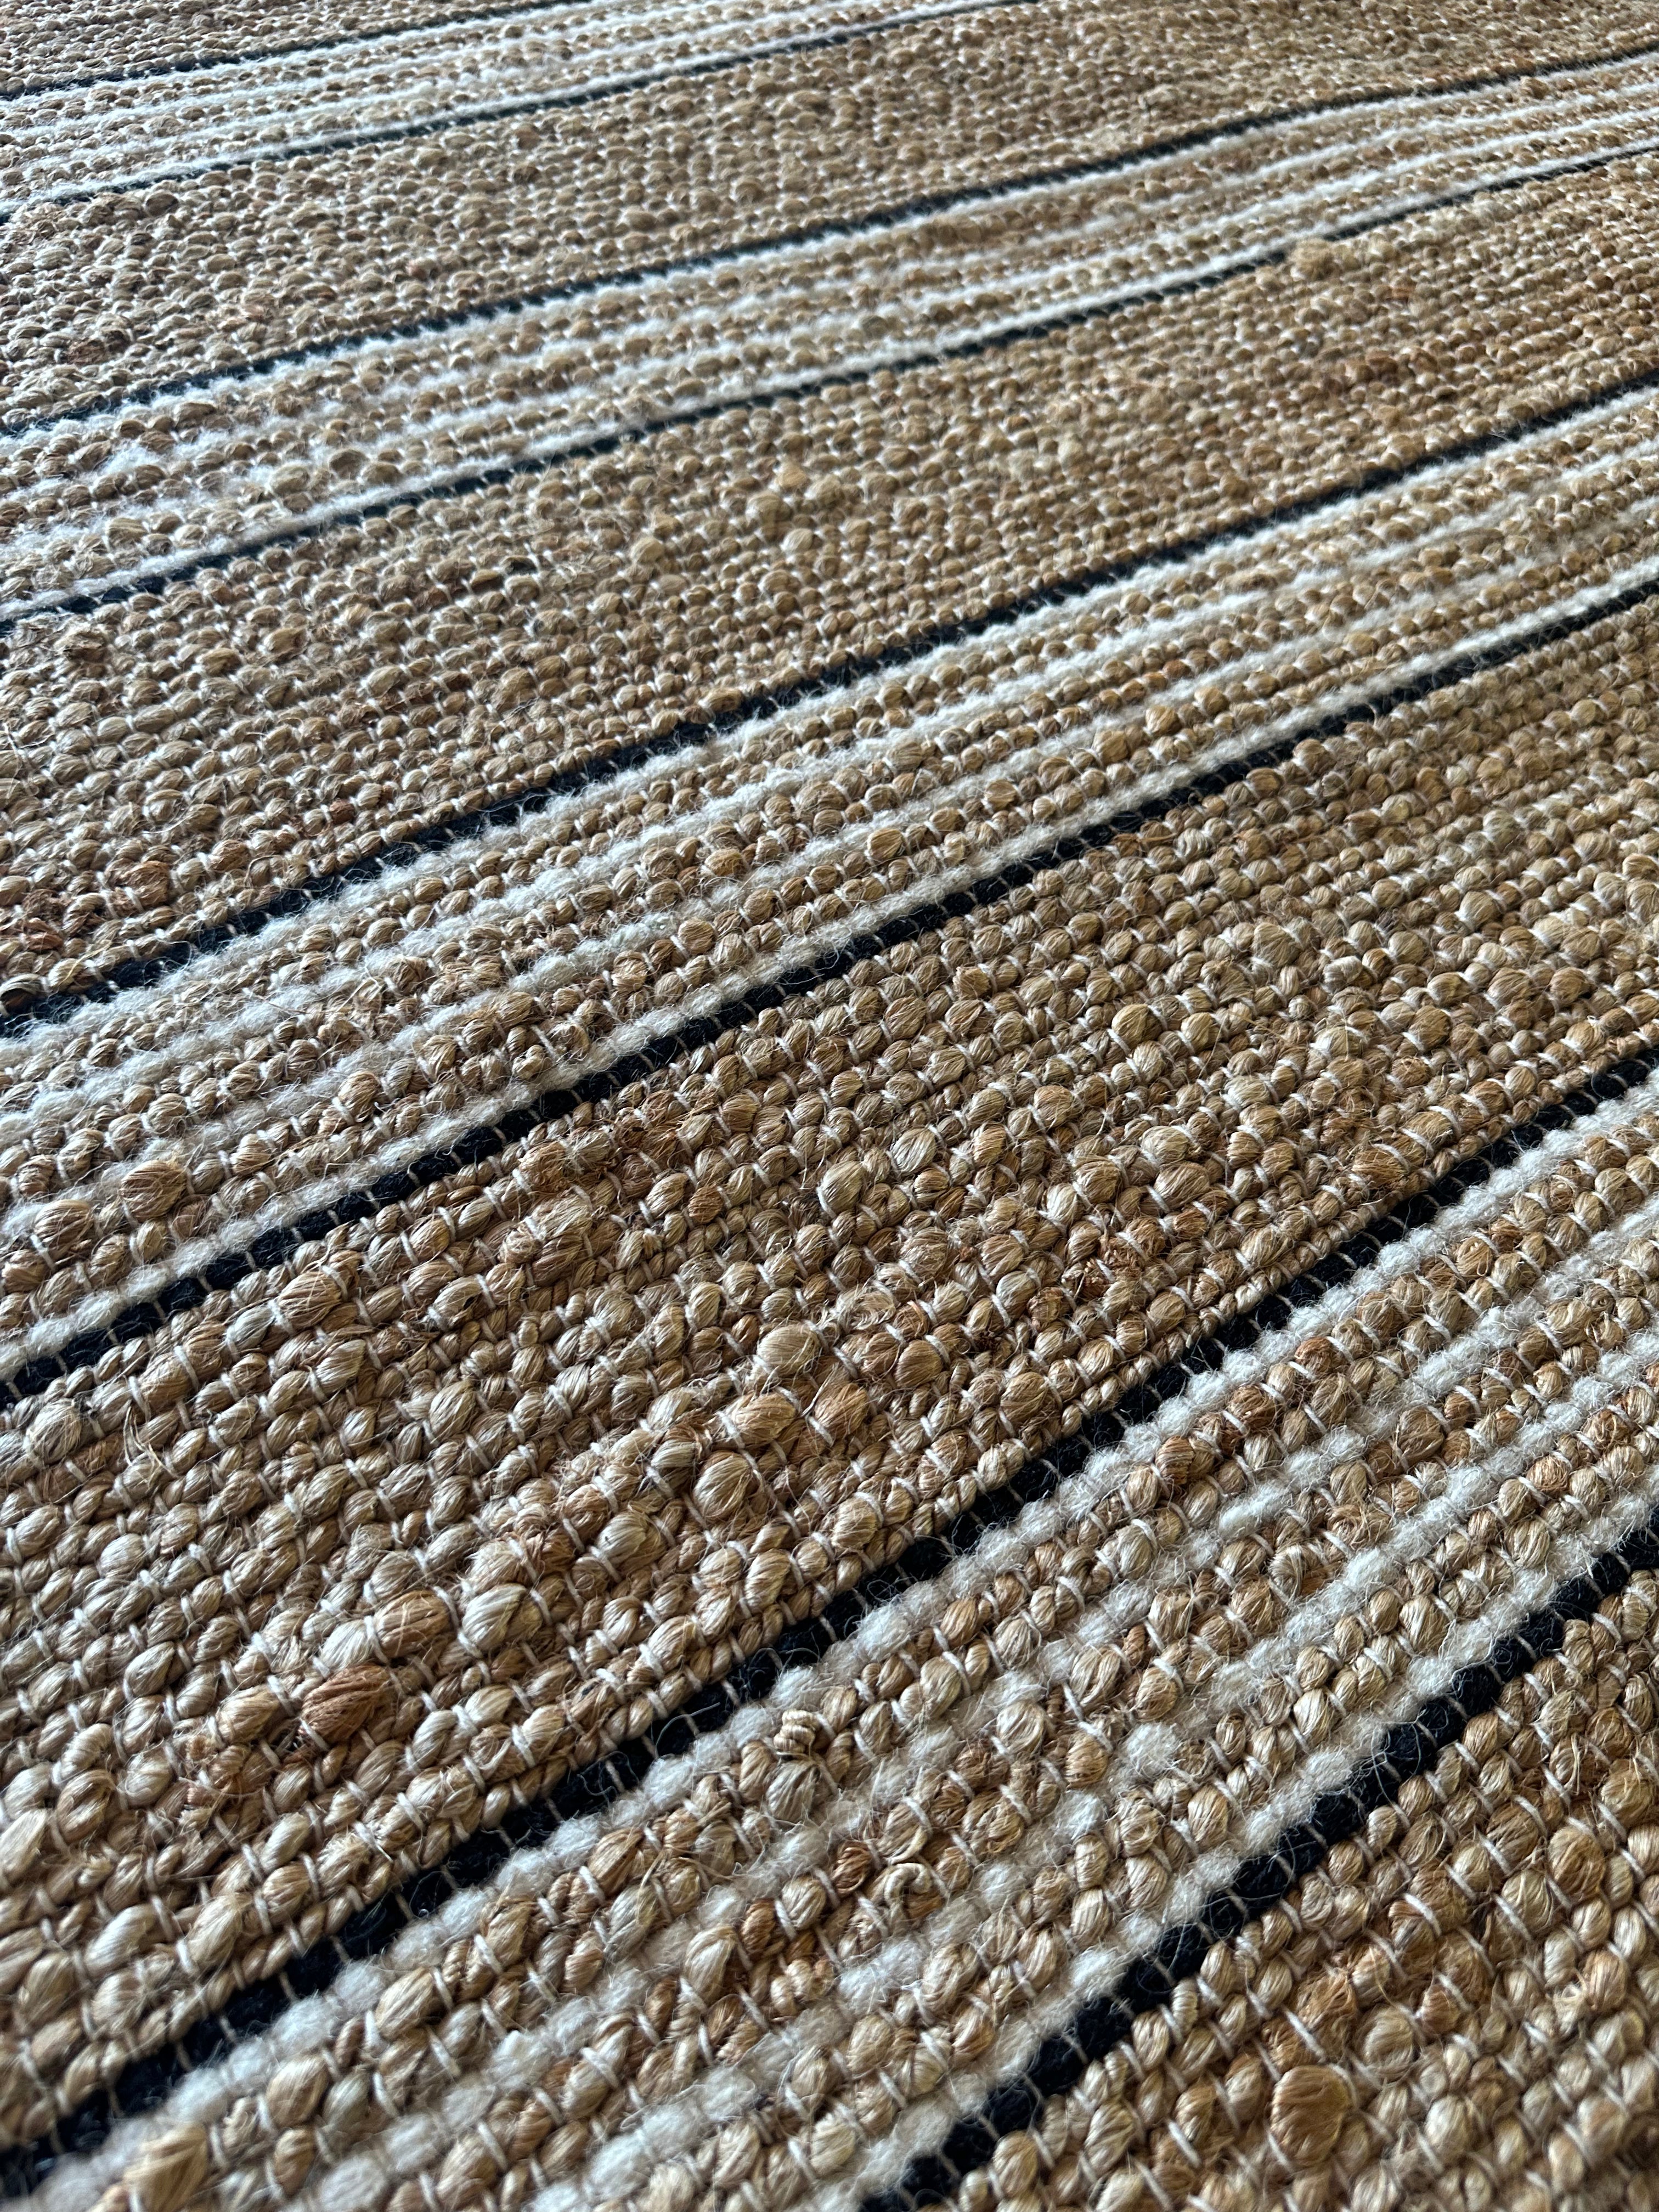 Count Basie Handwoven Striped Natural Jute Rug (Multiple Sizes) CLEARANCE